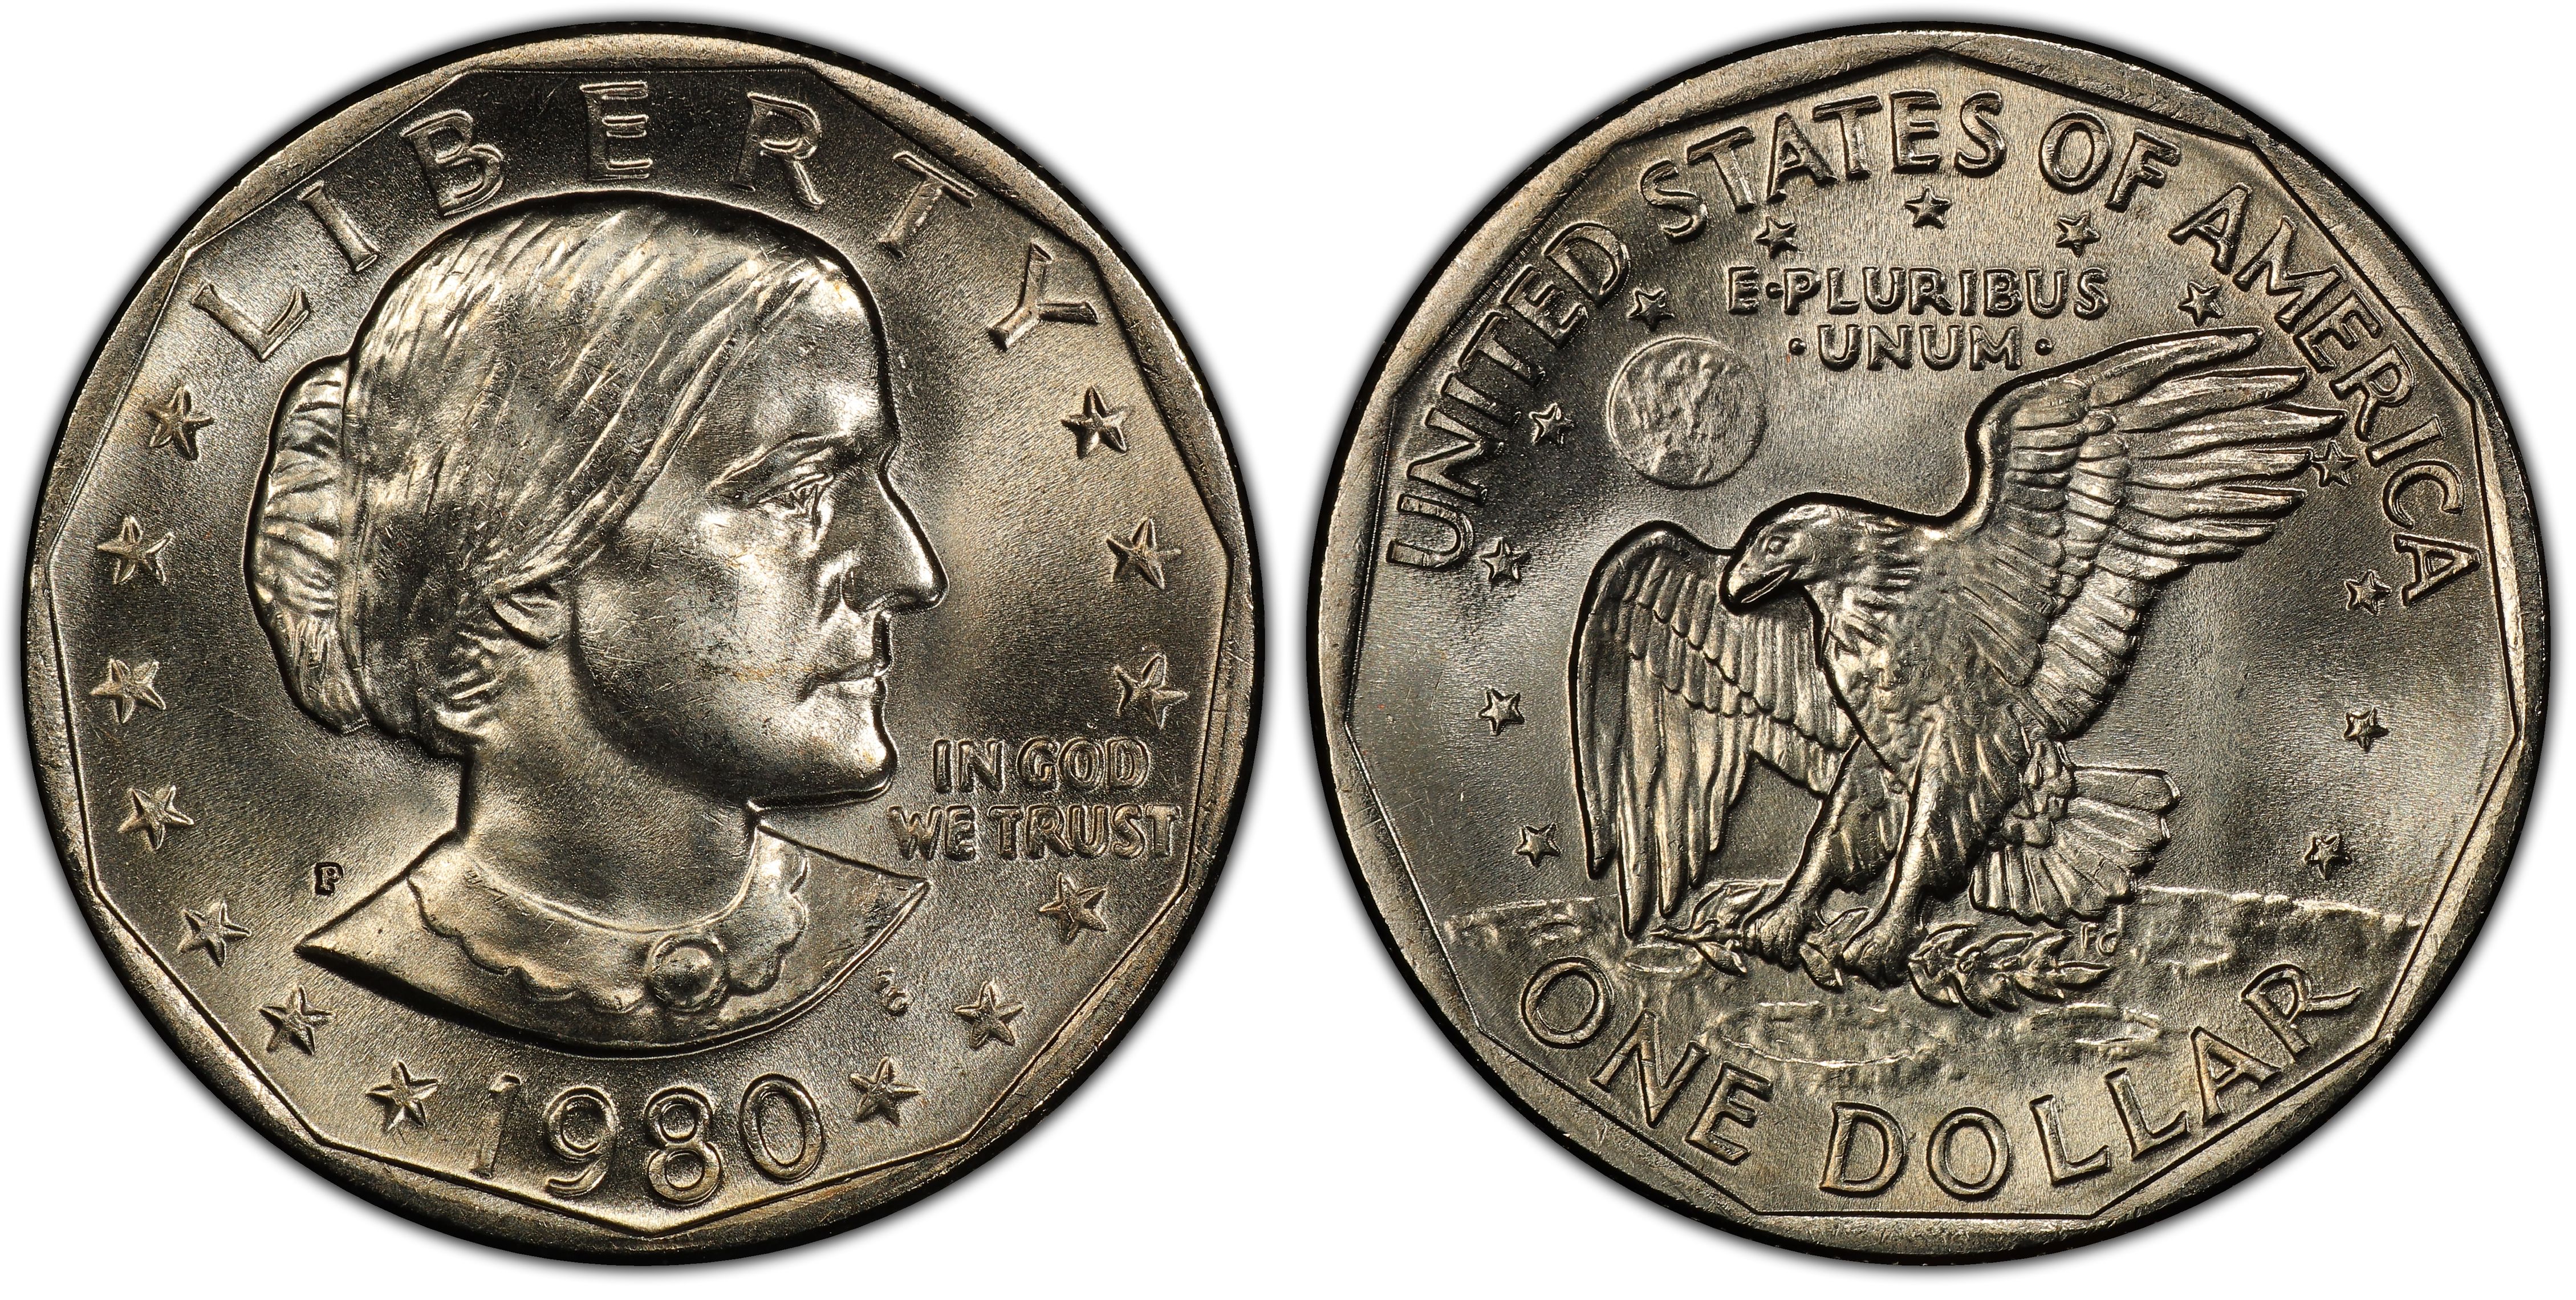 Images of Susan B. Anthony Dollar 1980-P SBA$1 - PCGS CoinFacts2200 x 1110